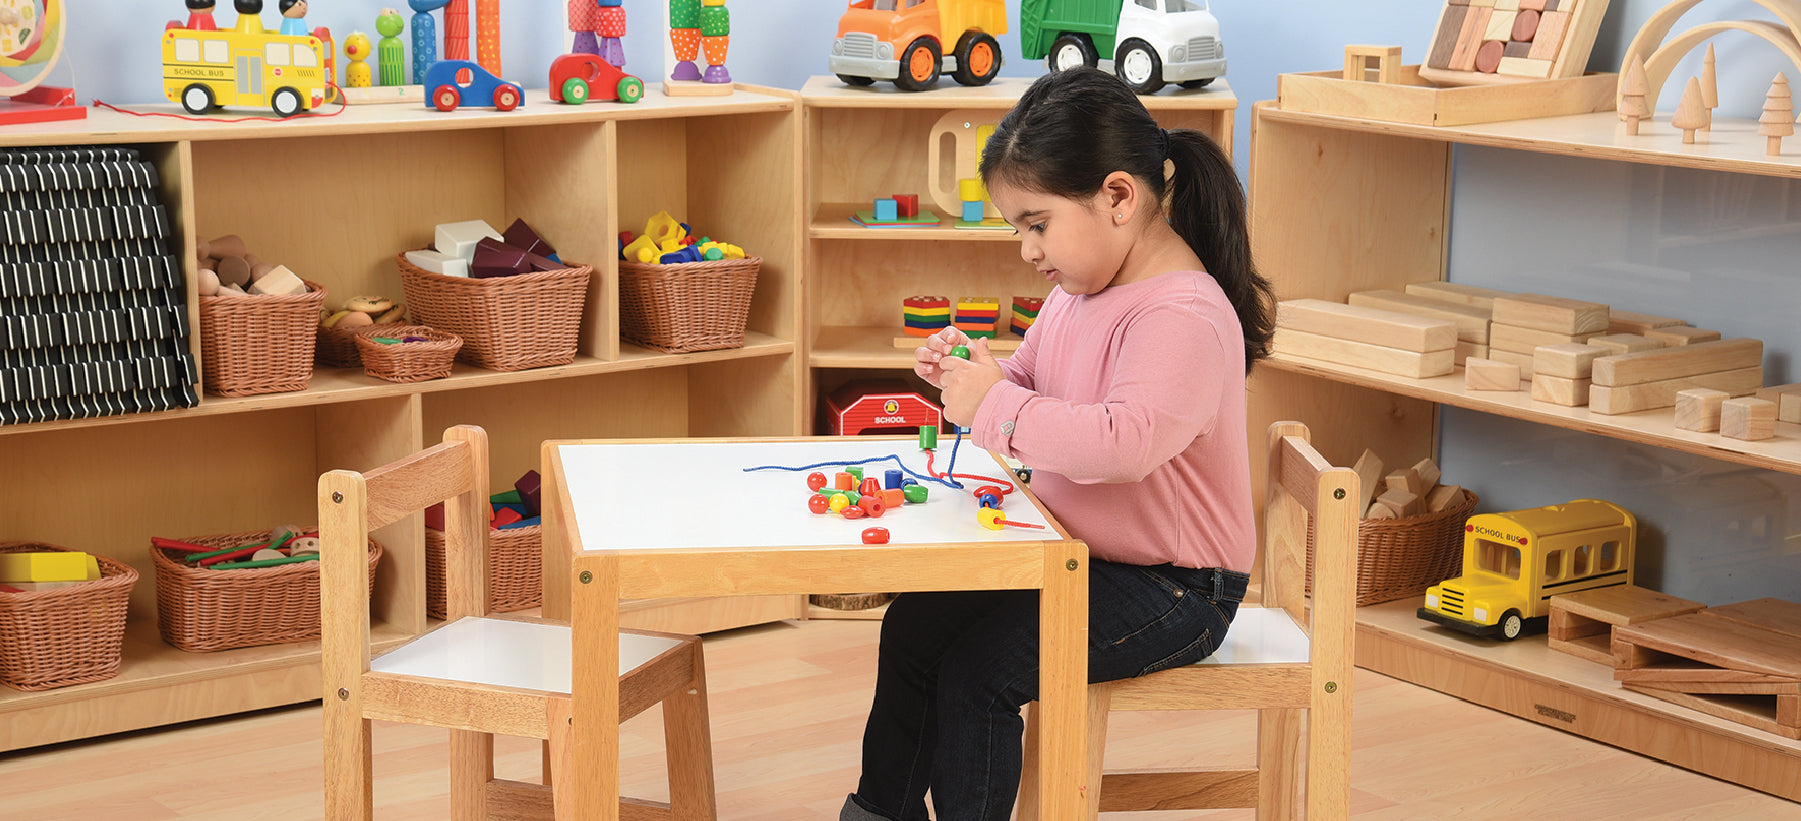 Back to School in an Early Childhood Center